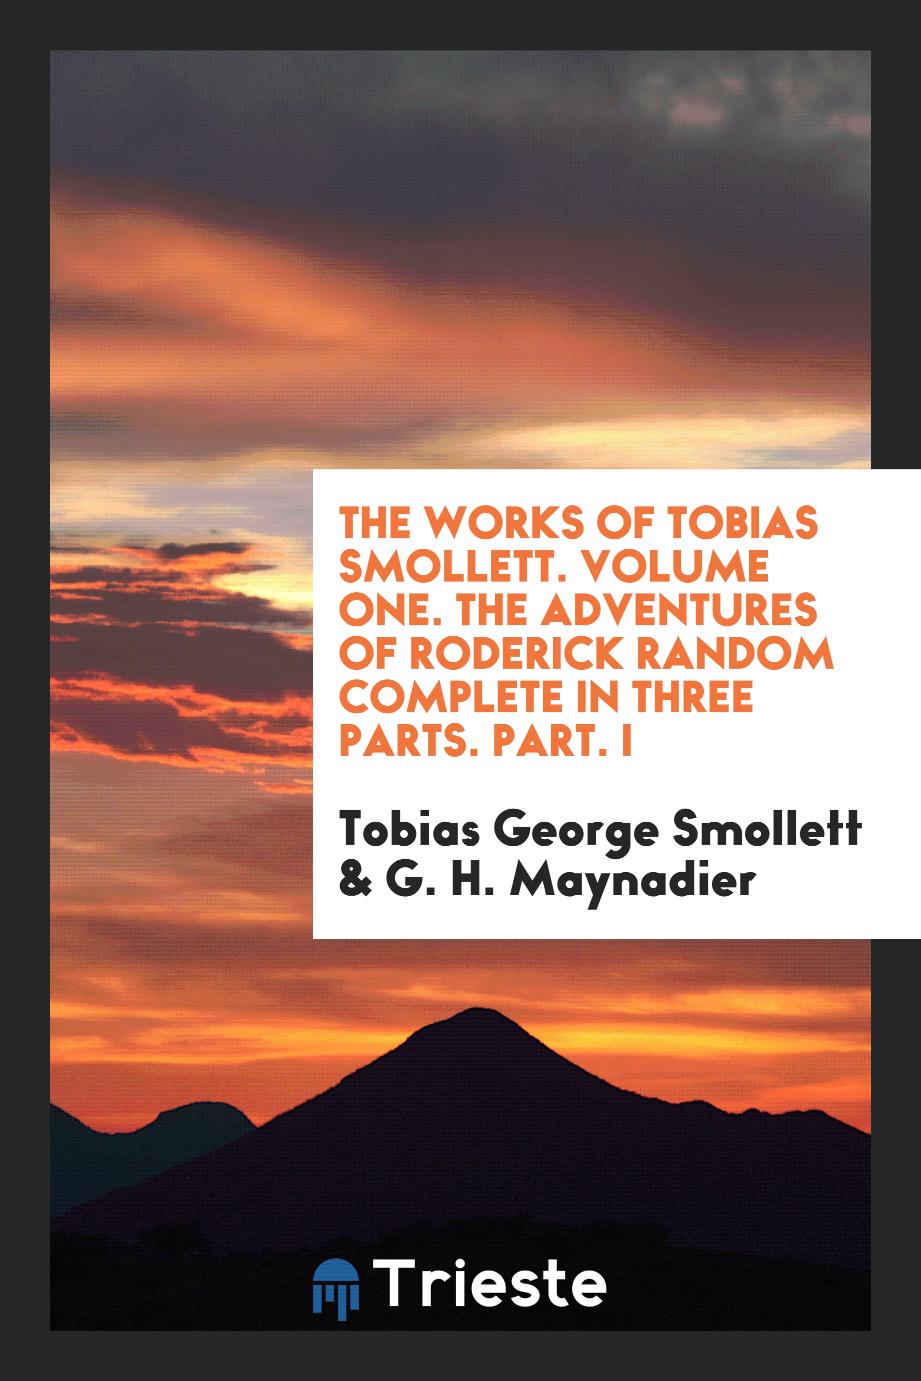 The works of Tobias Smollett. Volume one. The adventures of Roderick Random complete in three parts. Part. I